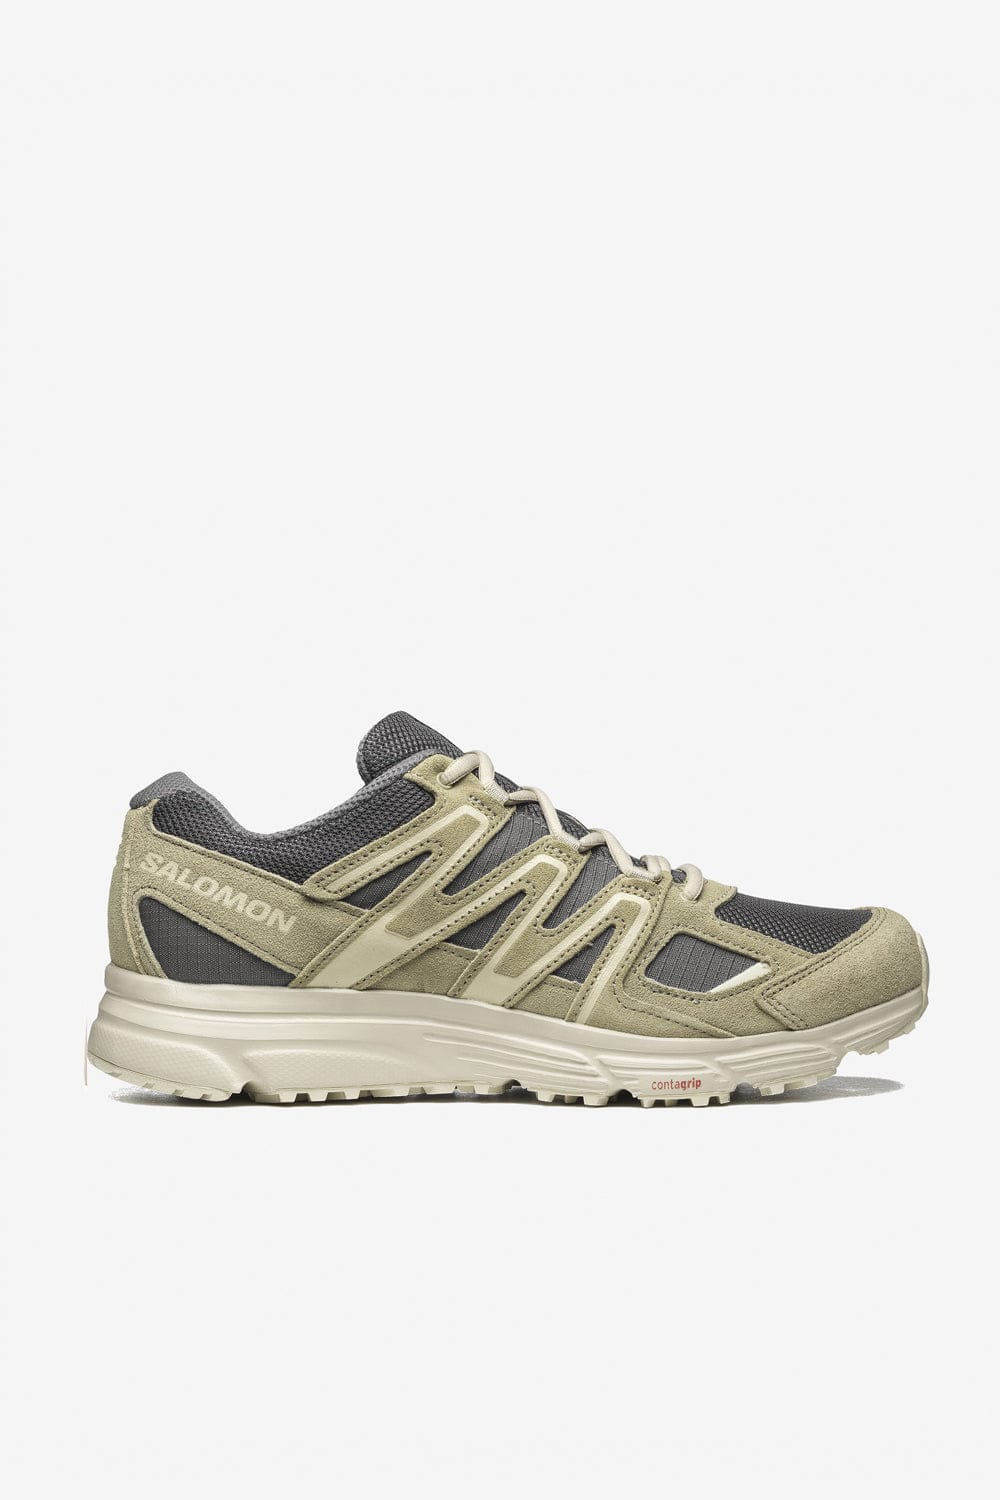 Salomon X-Mission 4 Suede (Pewter/Moss Gray)